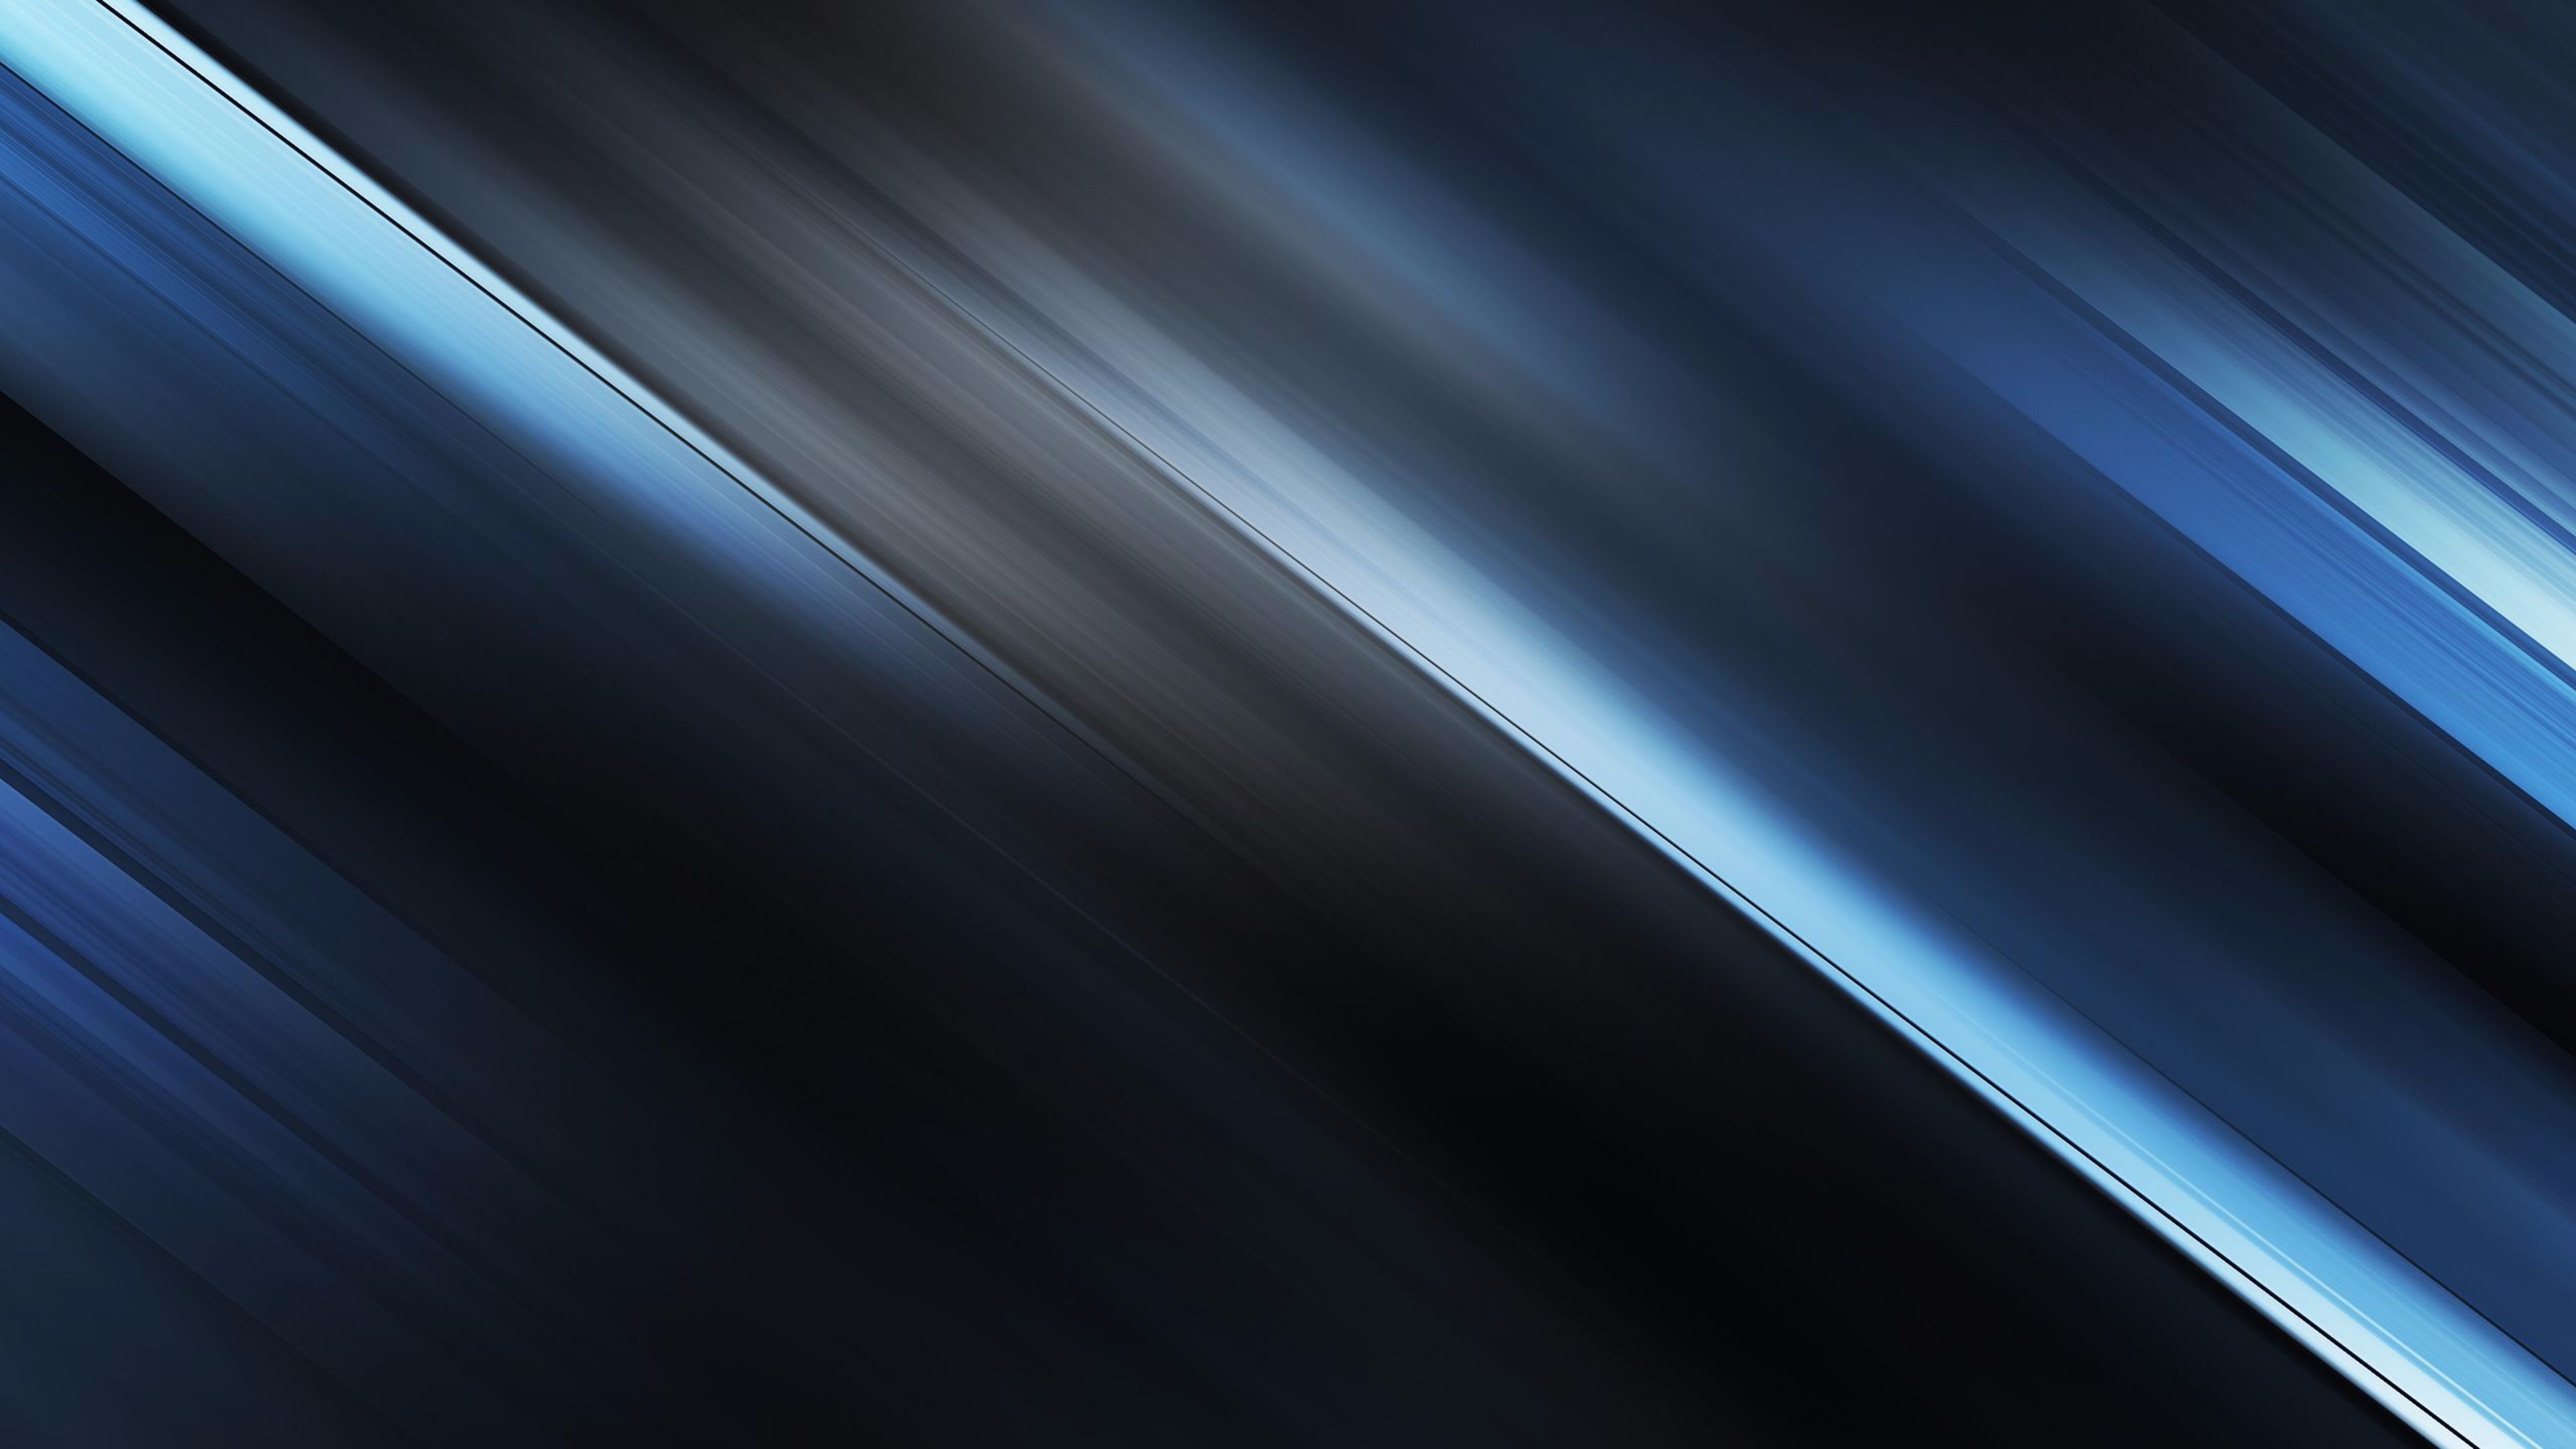 Black And Blue 4K Wallpaper - Black and Blue Abstract Wallpaper ·① WallpaperTag : Black and blue